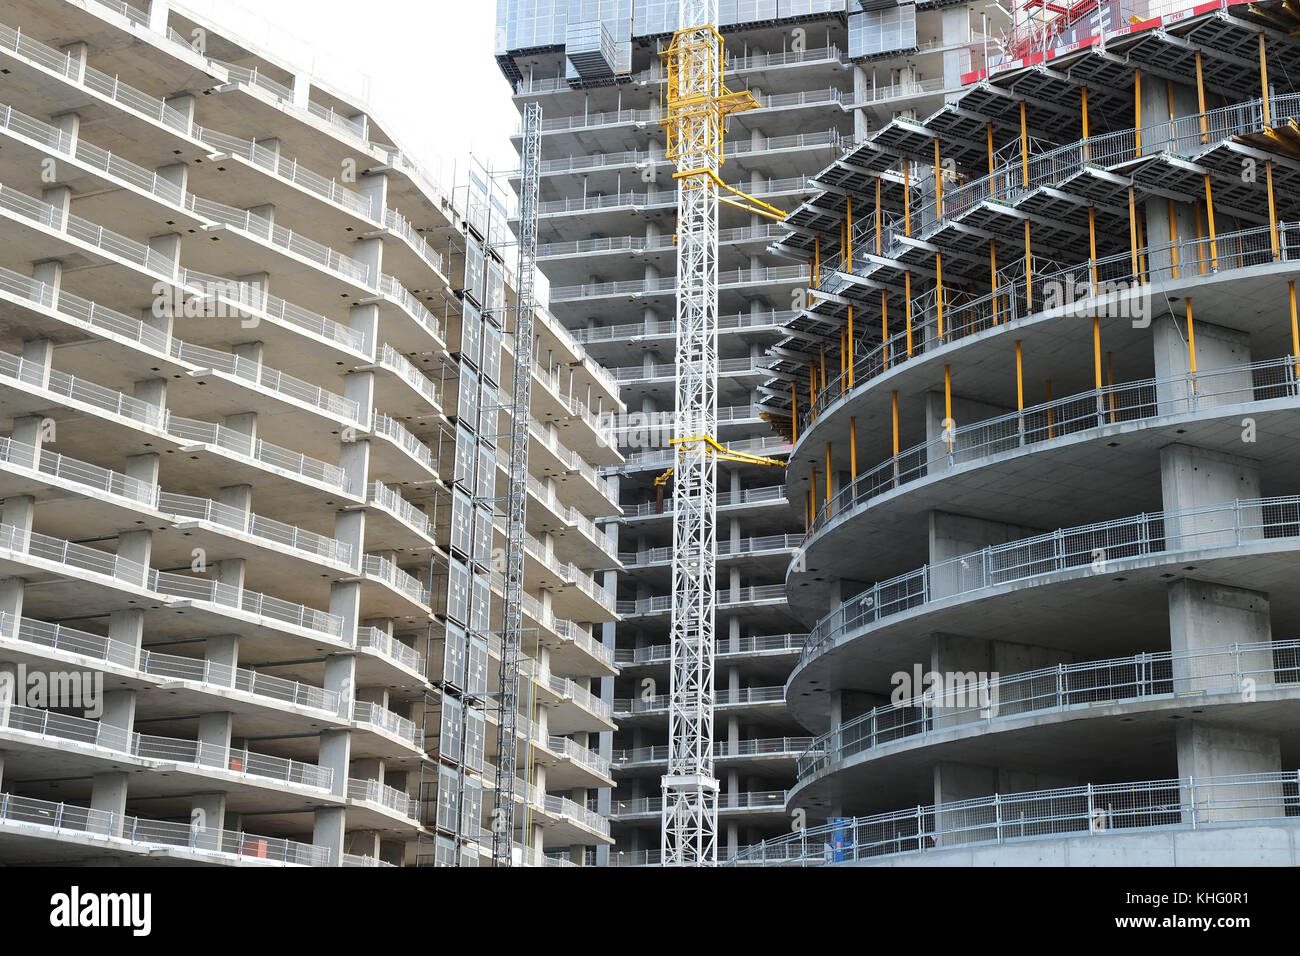 Thousands of new appartments being built at the old Wood Wharf site in Canary Wharf. Stock Photo